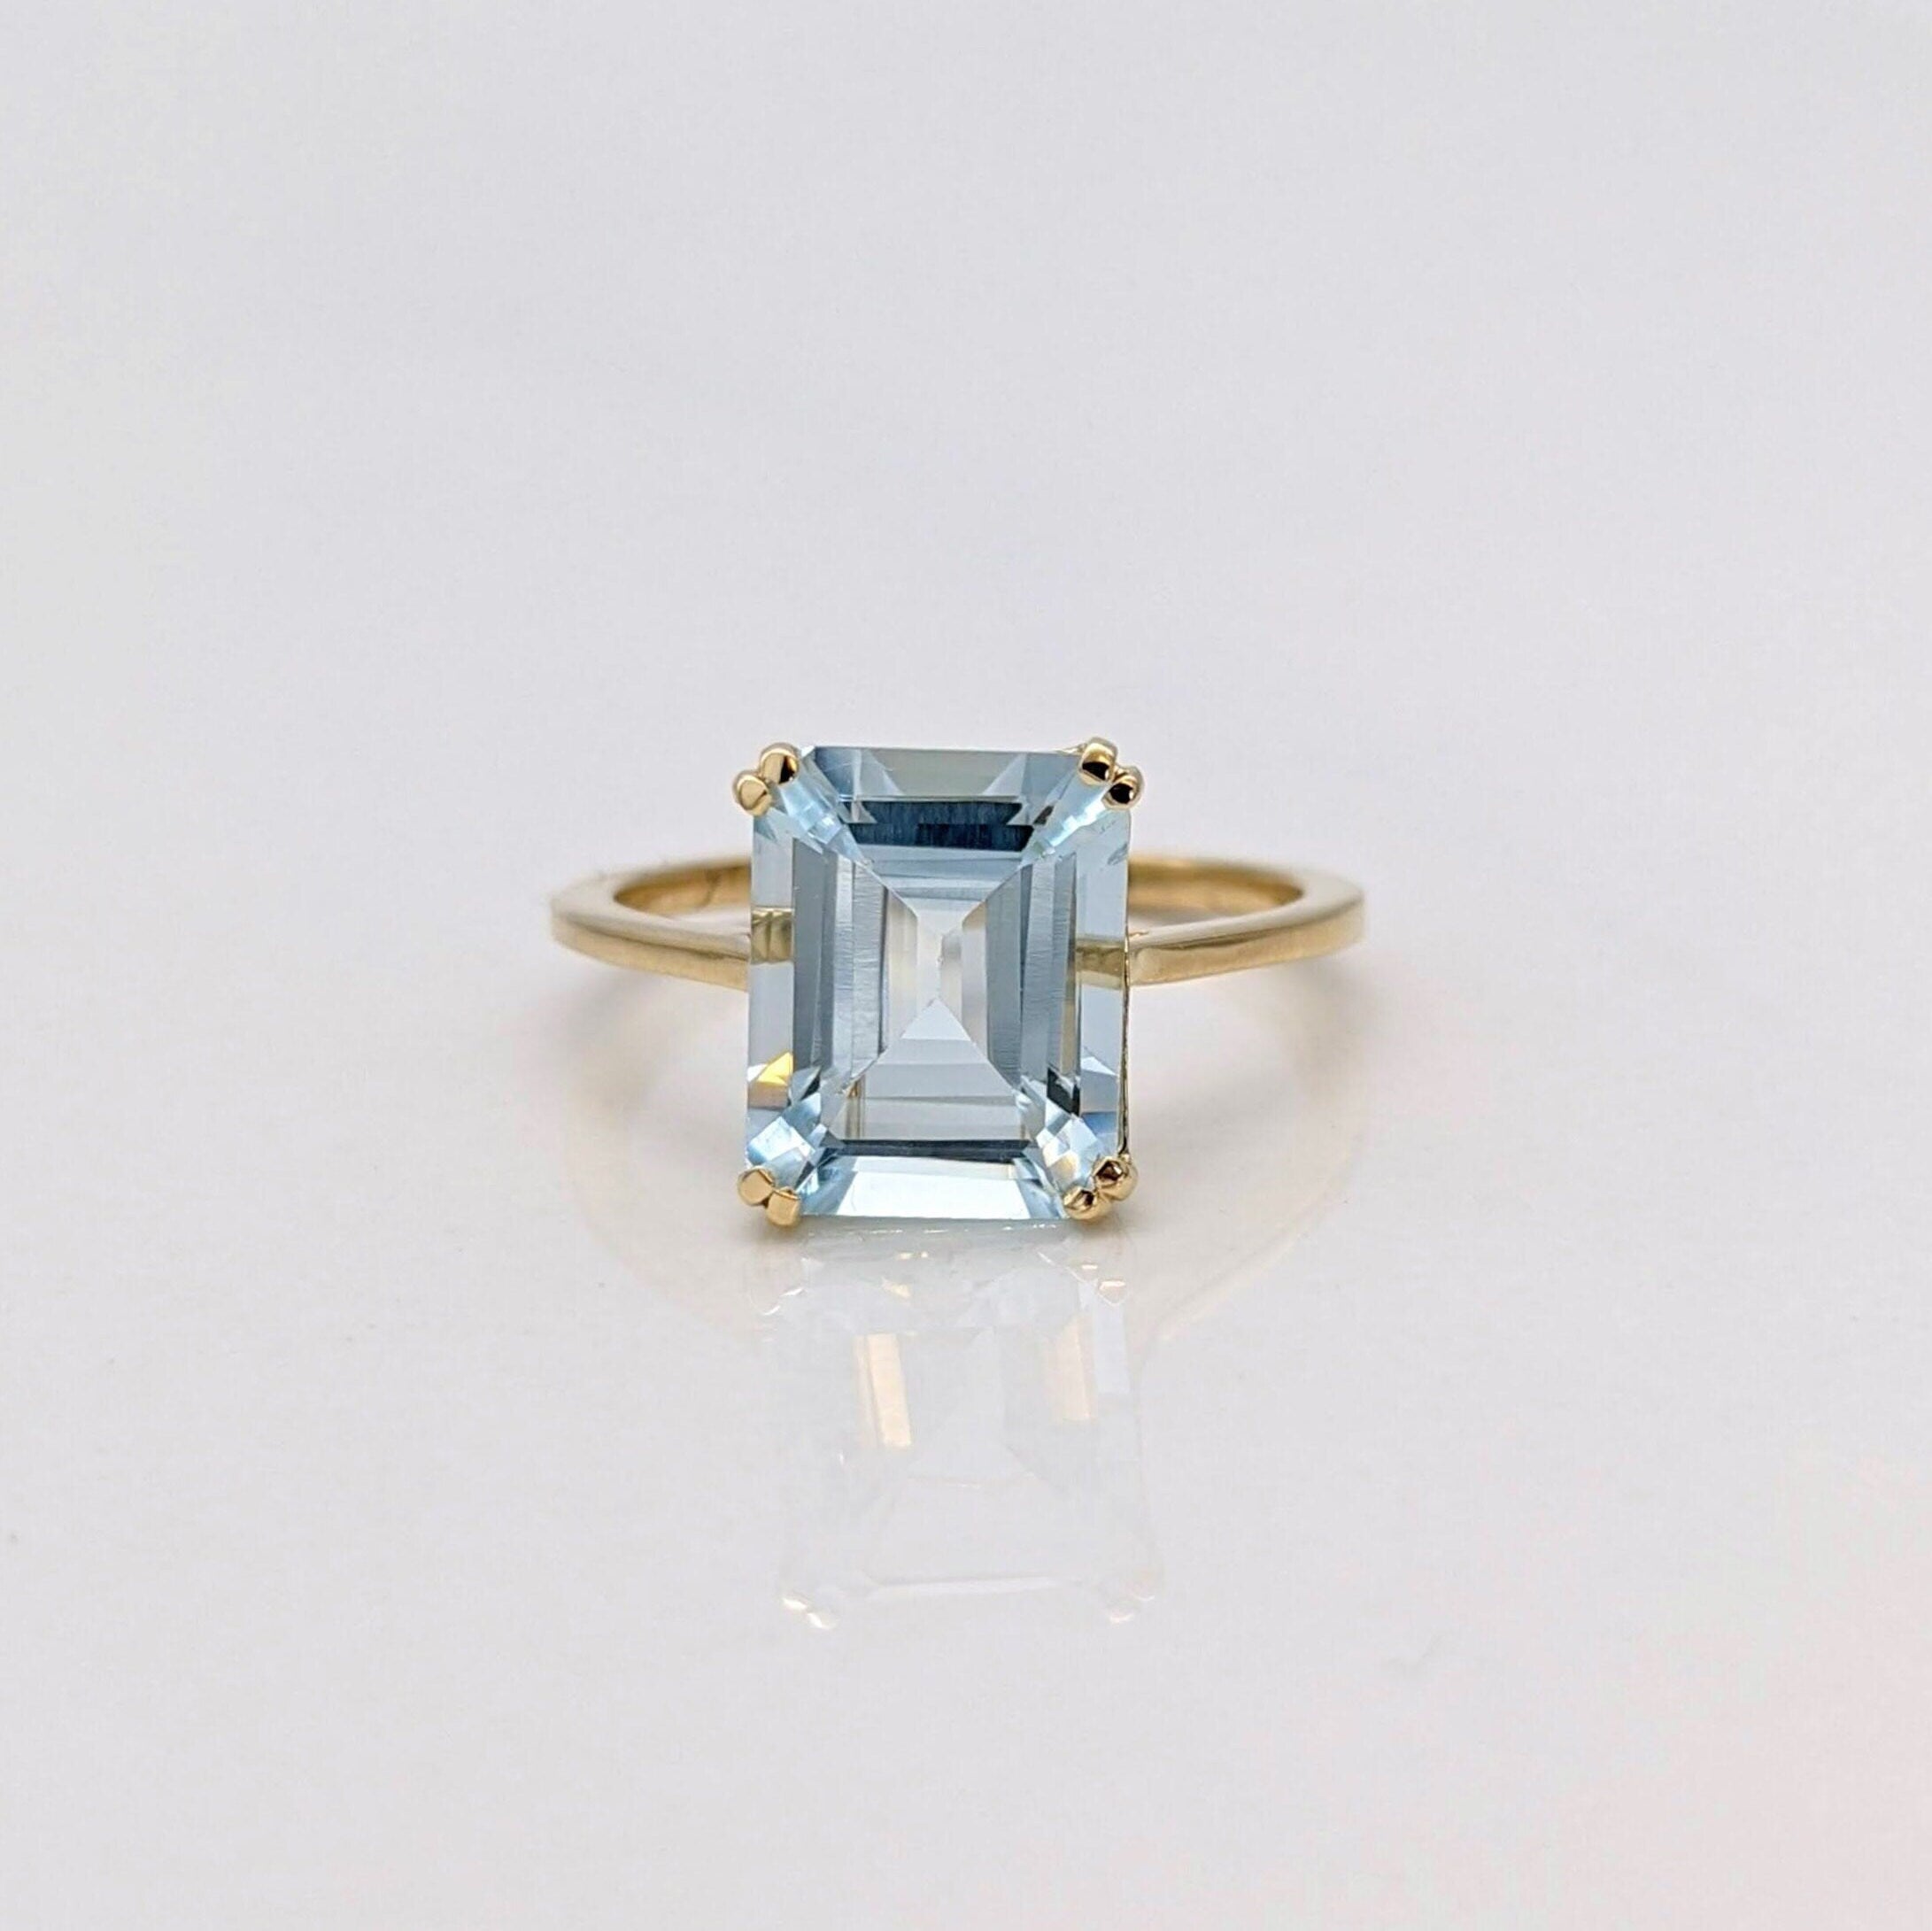 Emerald Cut or Radiant Cut Solitaire Ring Setting in Solid 14k Gold | 6x4 7x5 8x6 9x7 10x8 11x9 12x10 13x11 14x10 16x12 18x13 20x15 | Custom